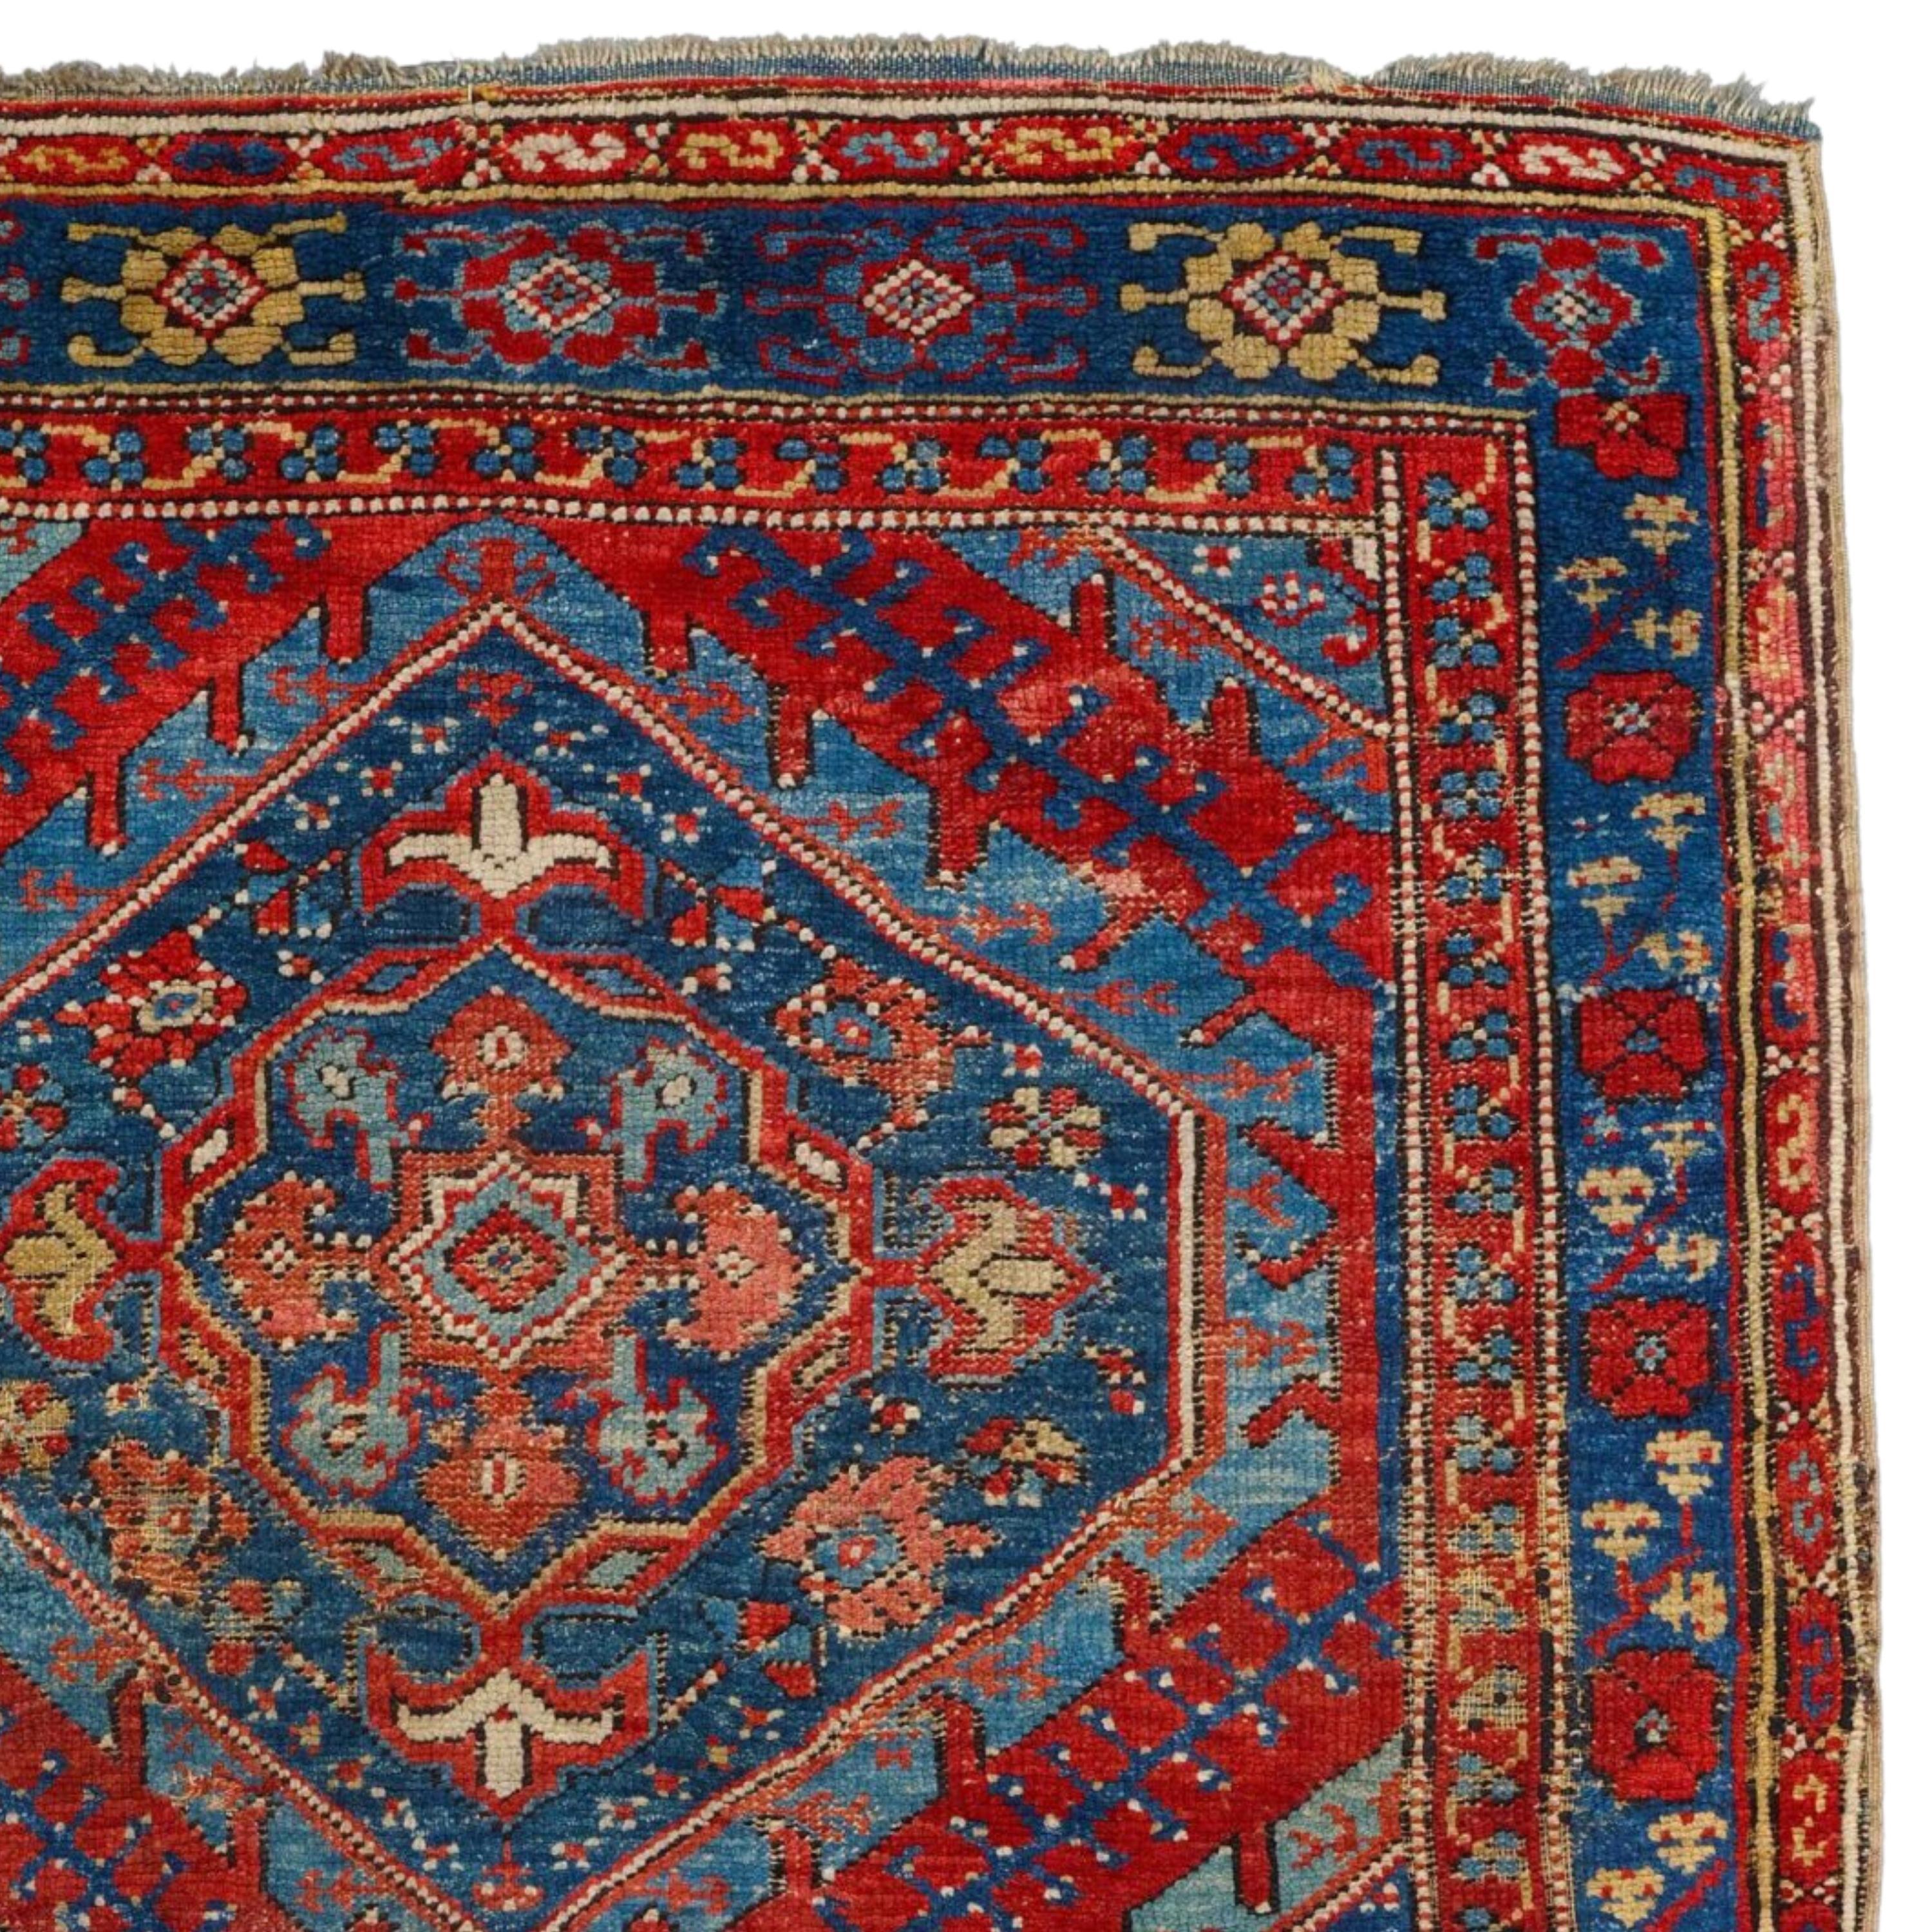 Antique Ushak Rug - Early 18th Century Anatolian Ushak Rug, Antique Carpet In Good Condition For Sale In Sultanahmet, 34